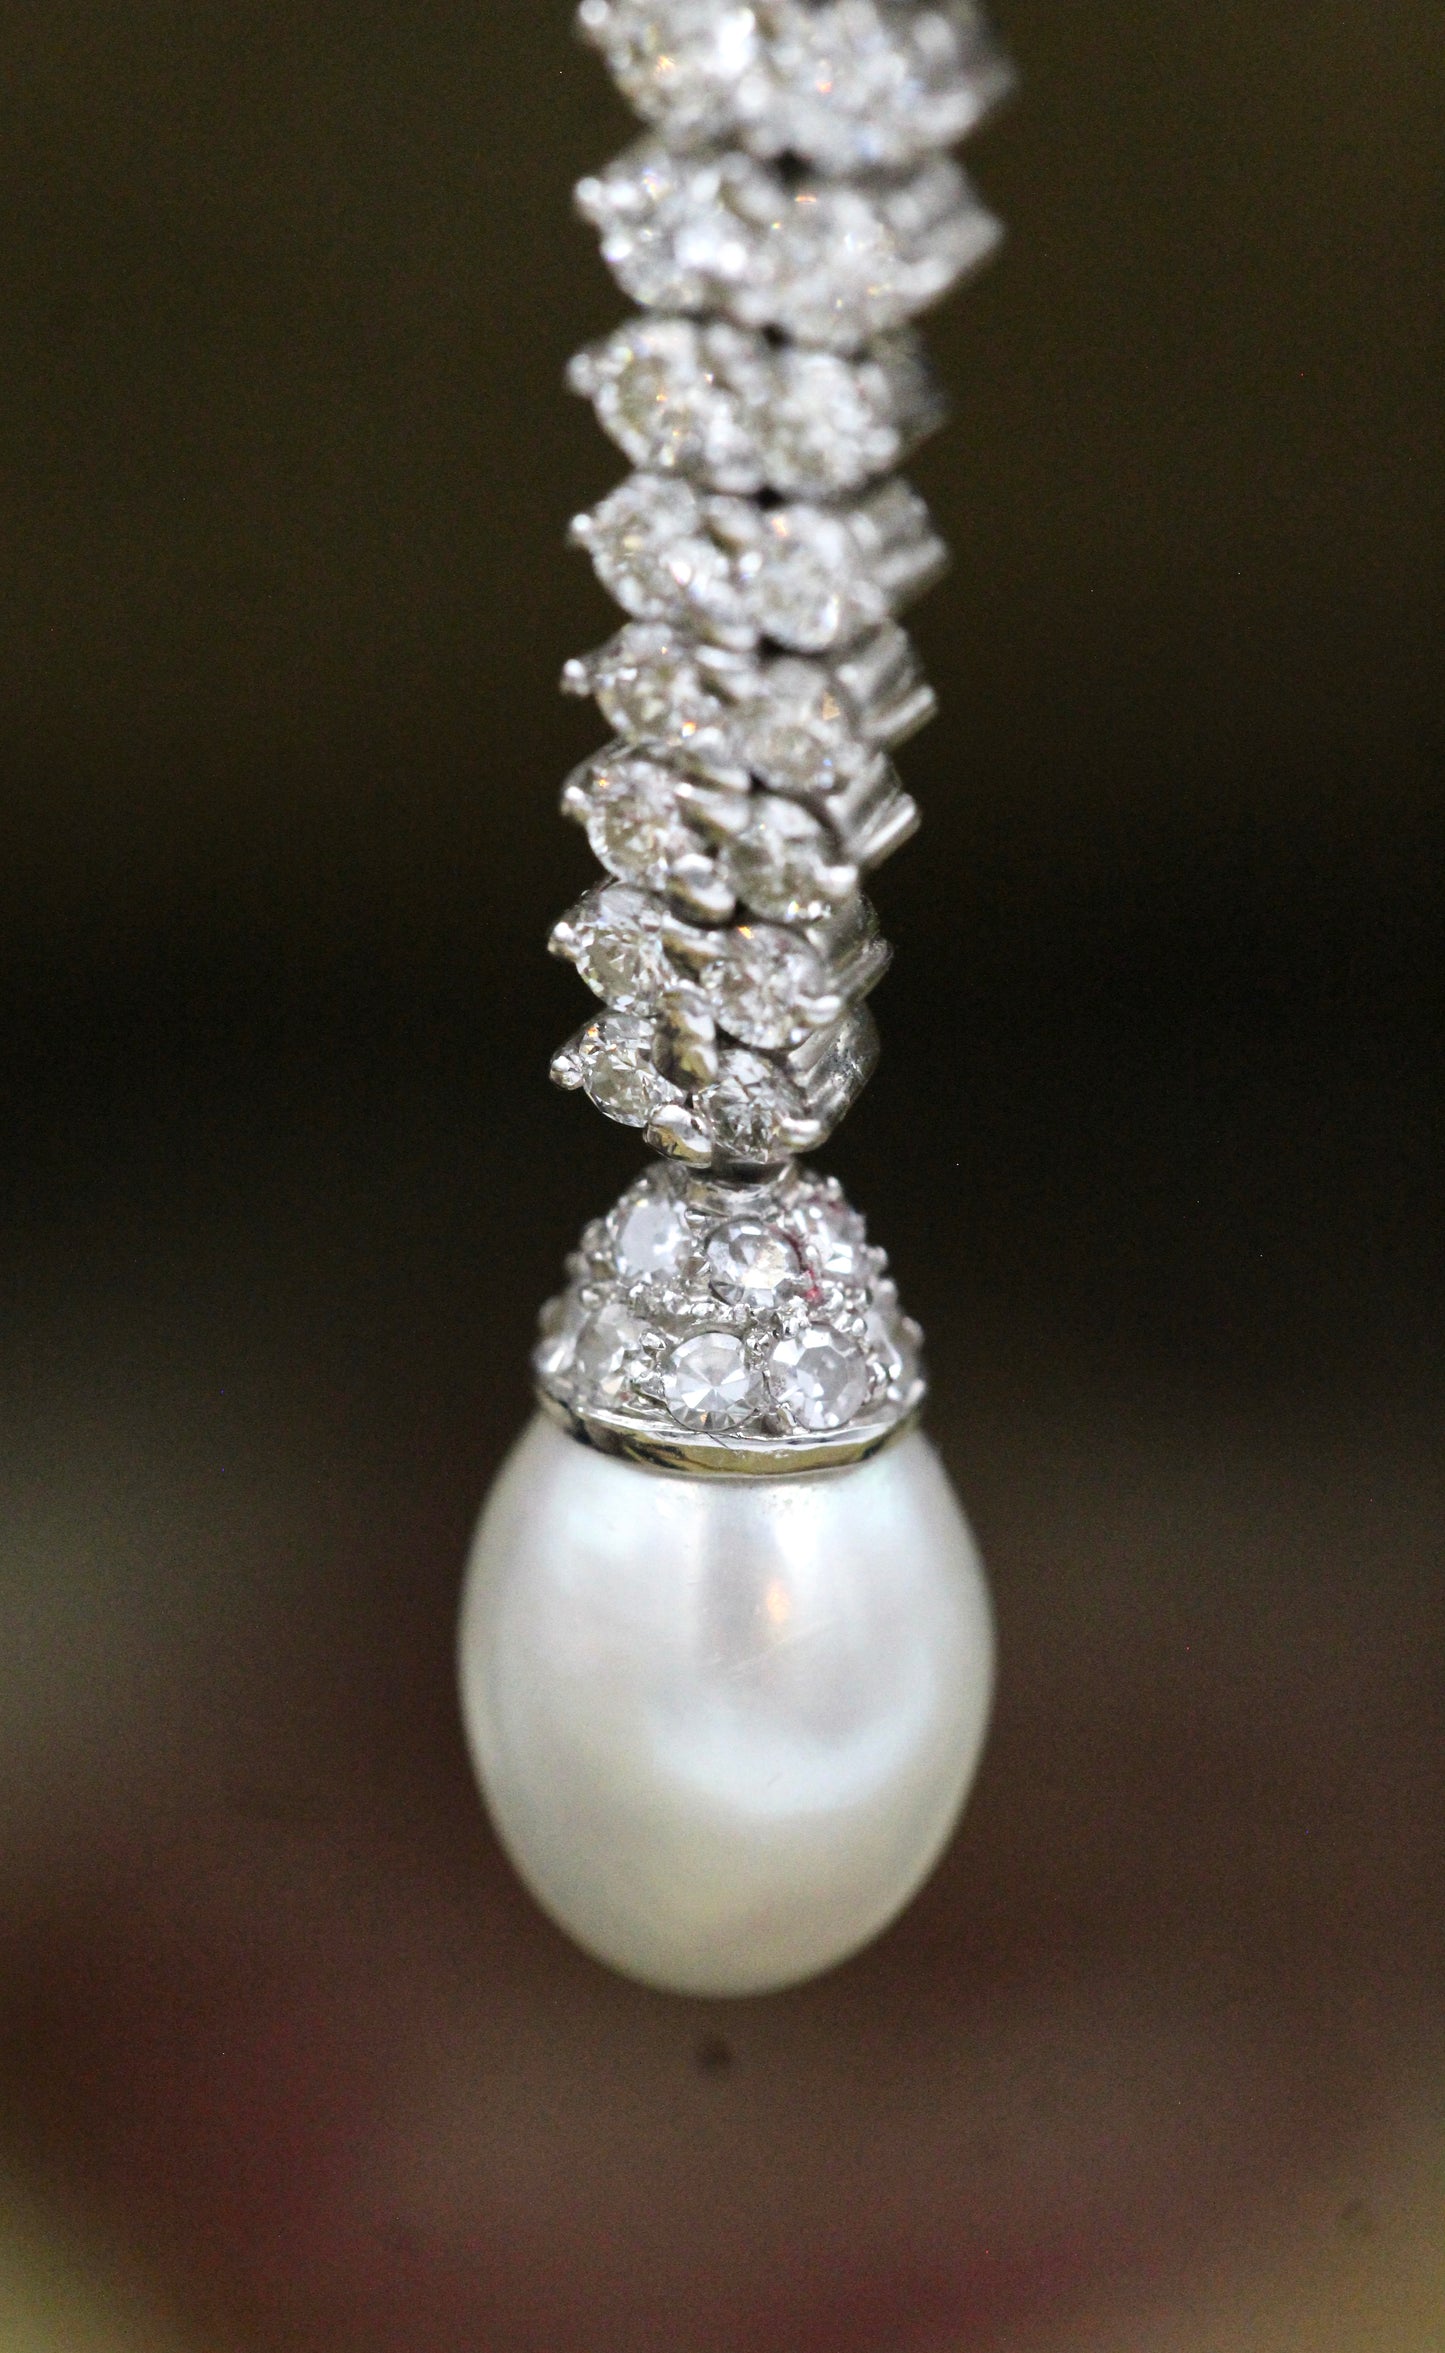 An Exquisite Pair of Cultured Pearl & Diamond Drop Earrings, Circa 1950. - Robin Haydock Antiques